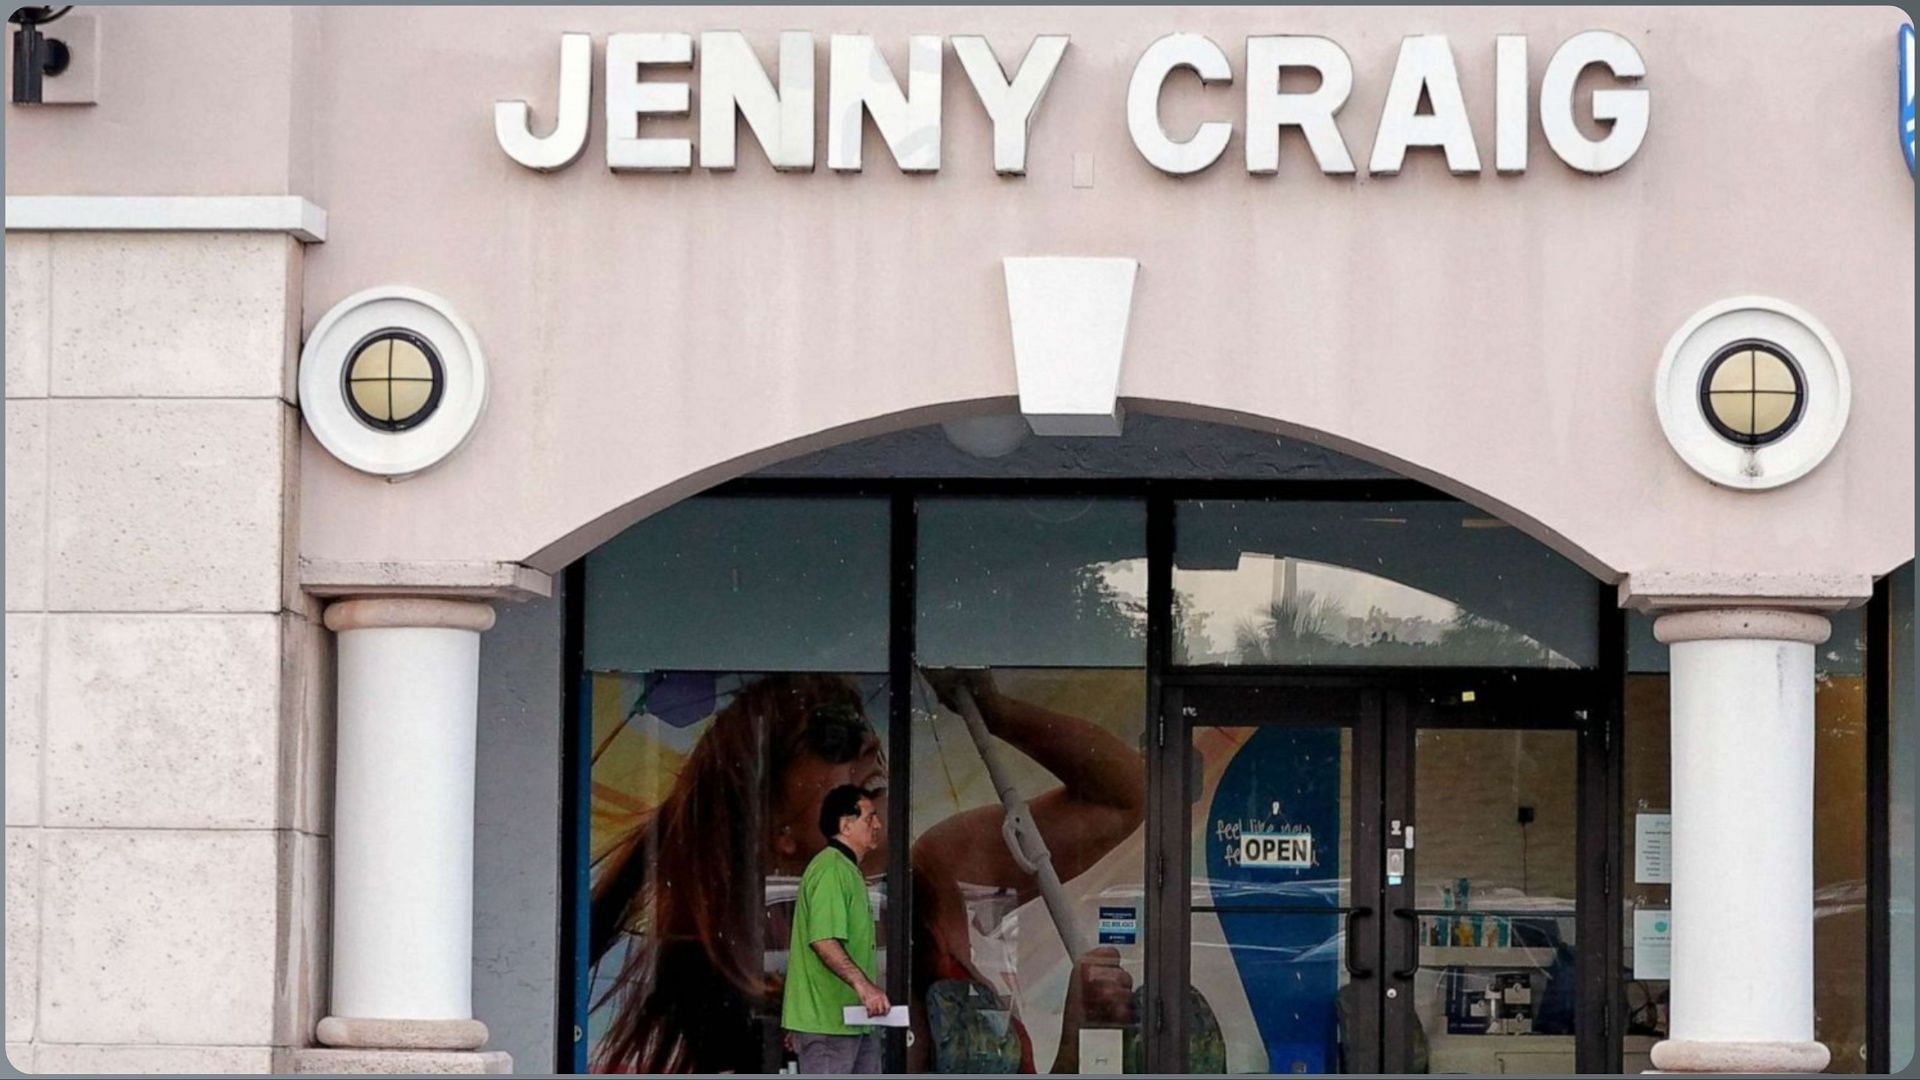 Jenny Craig Inc. to reportedly shut some of its weight-loss centers (Image via Joe Raedle/Getty Images)